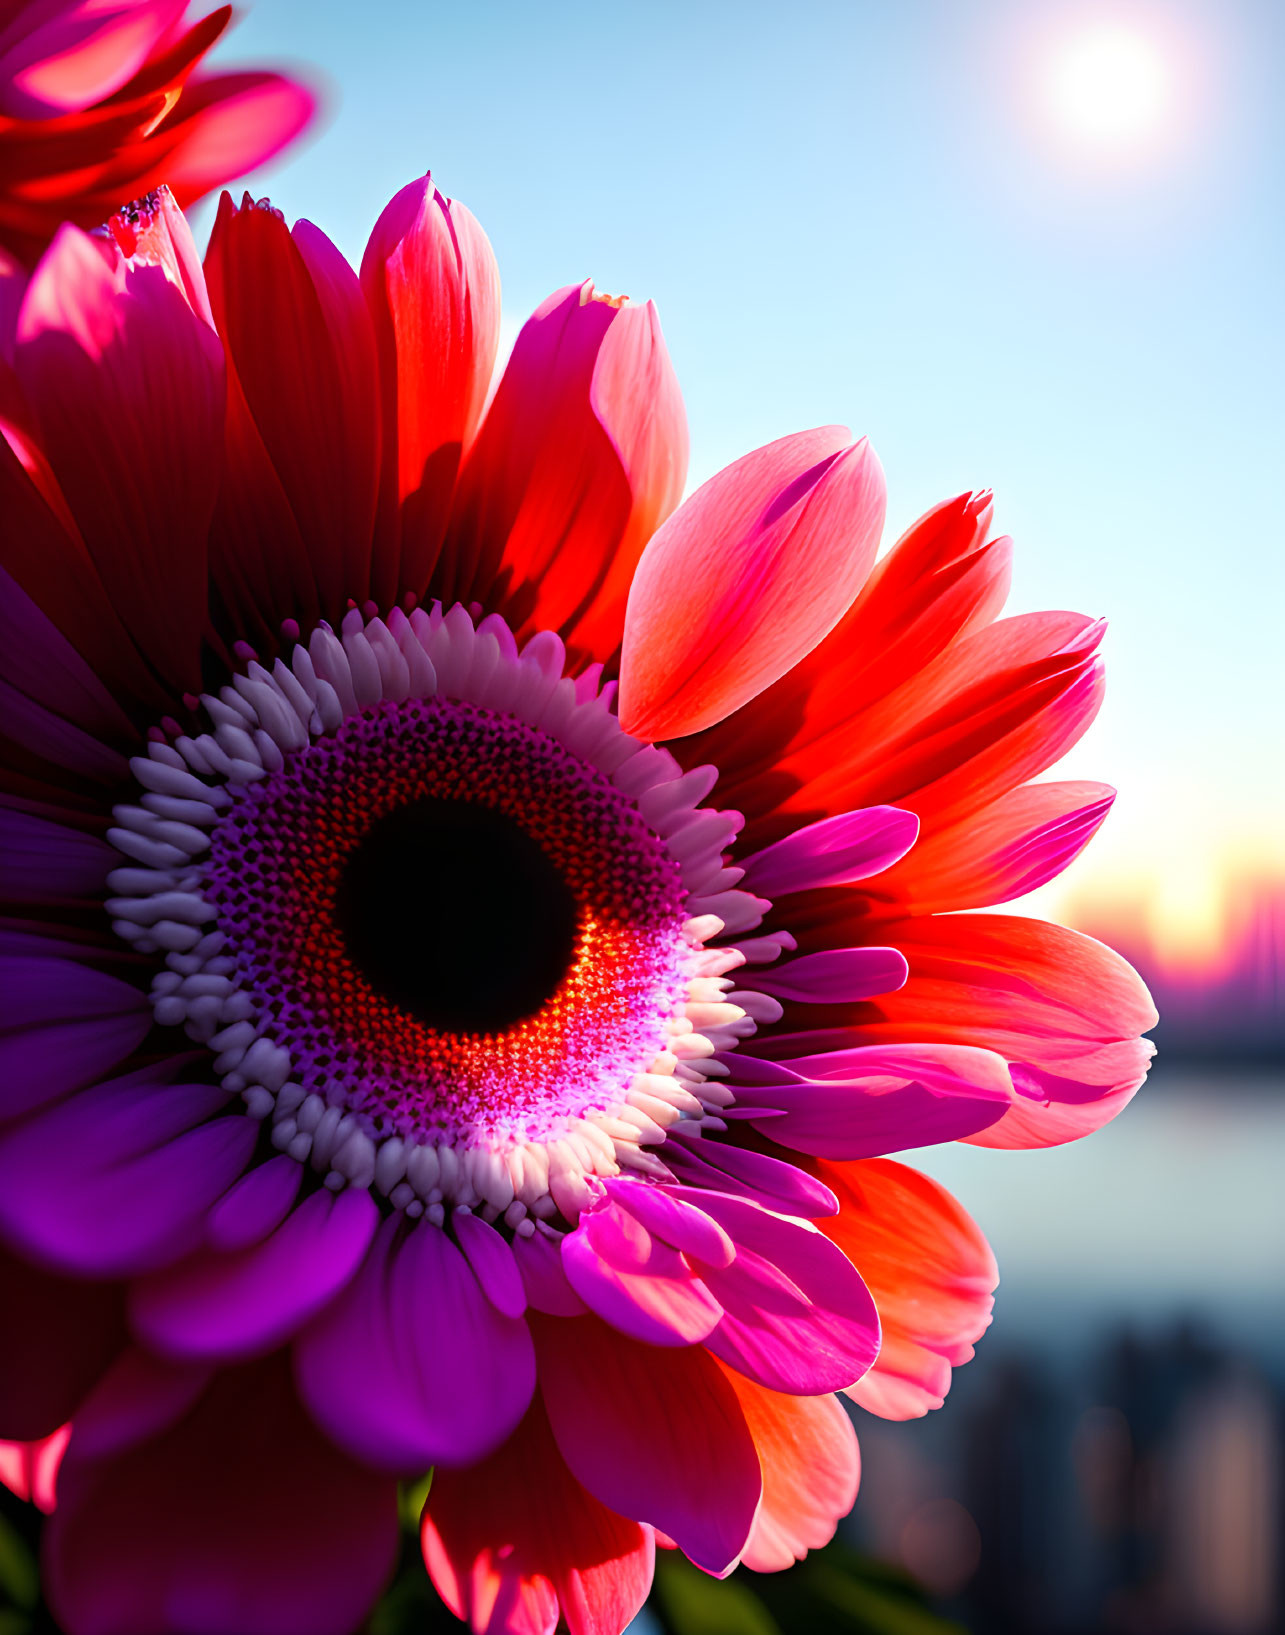 Close-up of vibrant red gerbera flower against pink gradient, with soft-focus sunset cityscape.